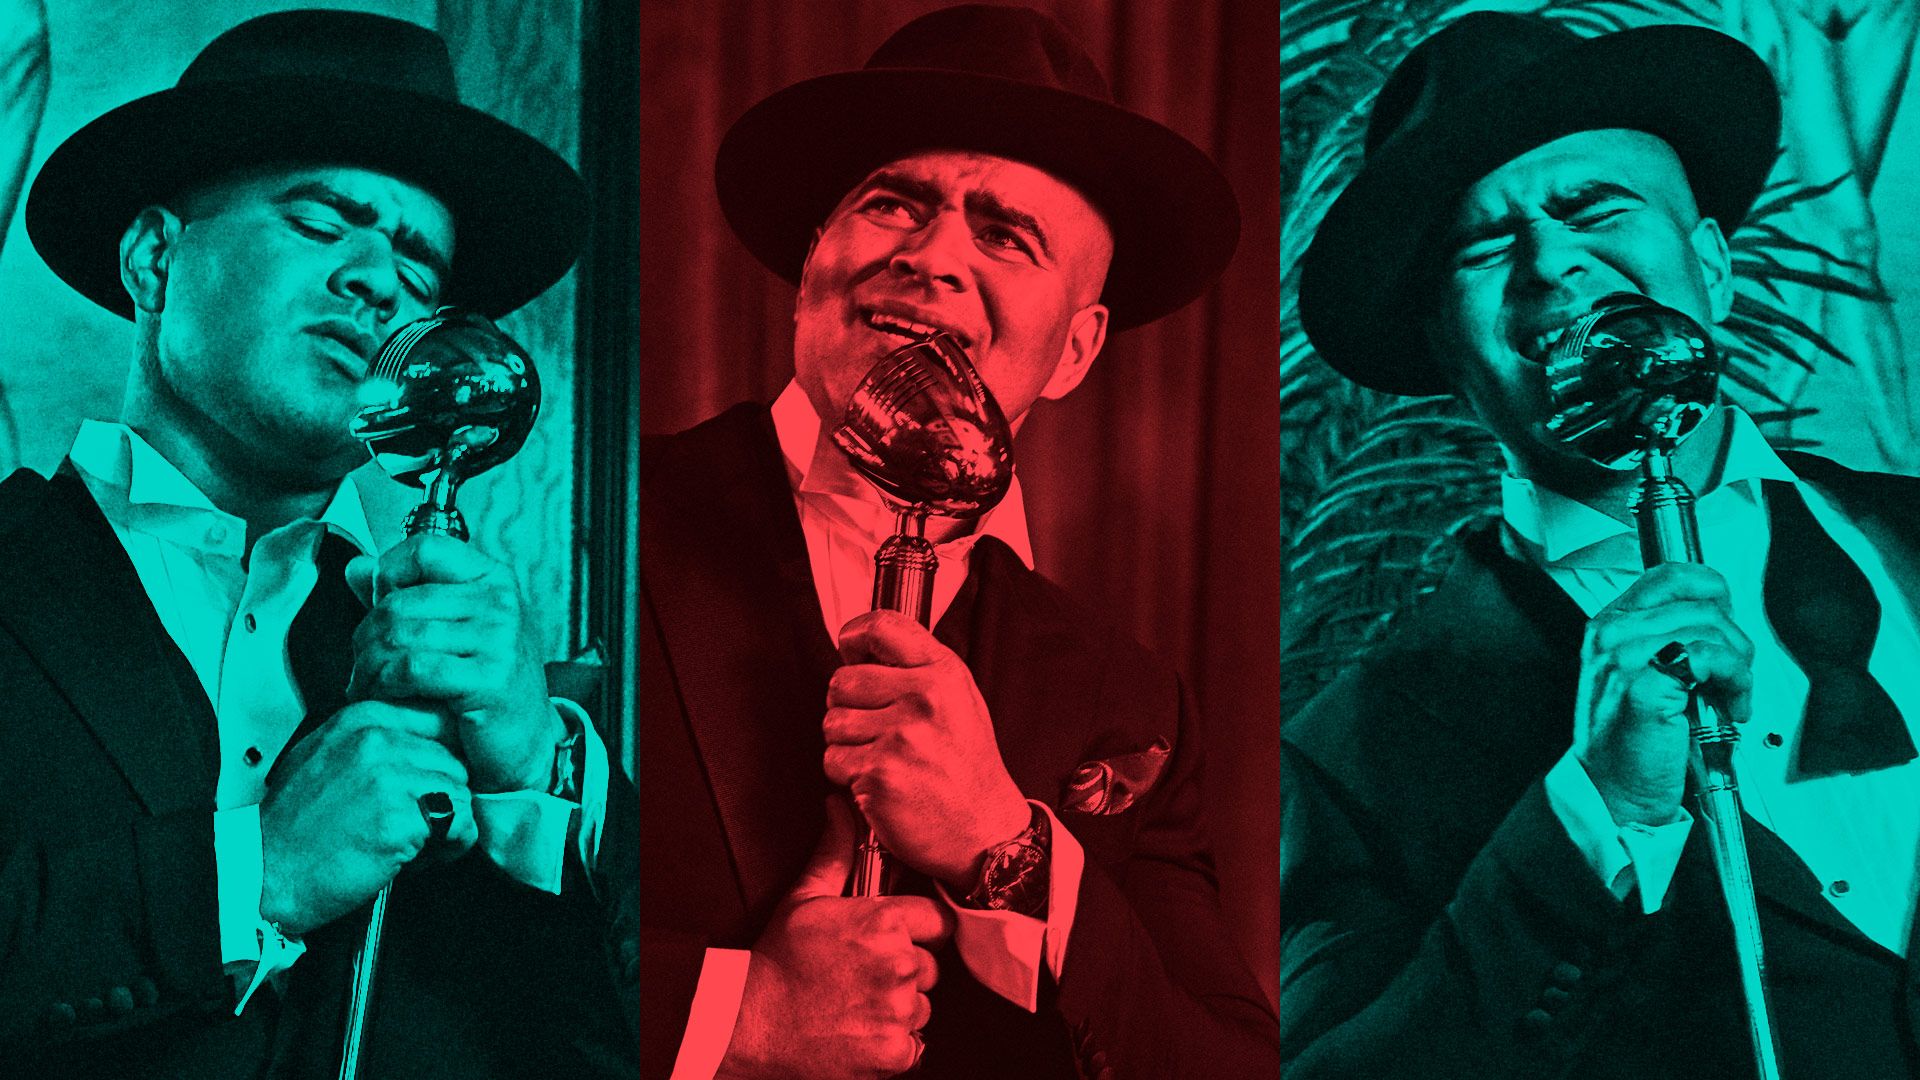 A trio of colorized images of Bull star Chris Jackson singing into a microphone while wearing a period tuxedo.